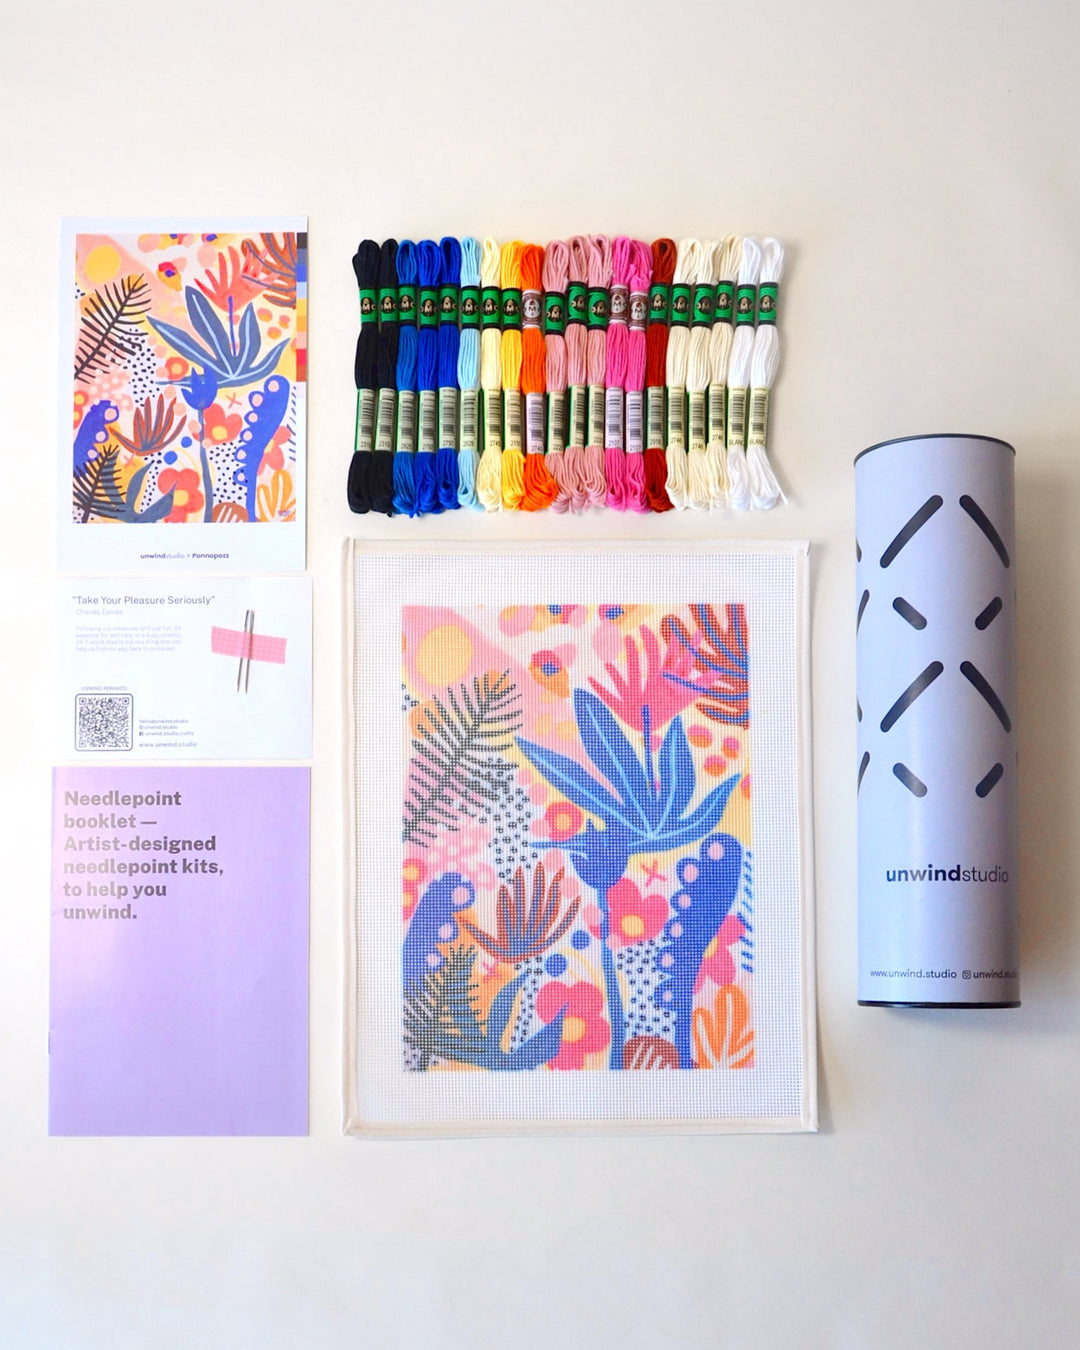 Camille abstract and modern design for a needlepoint kit by Unwind Studio in collaboration with artist Ponnopozz